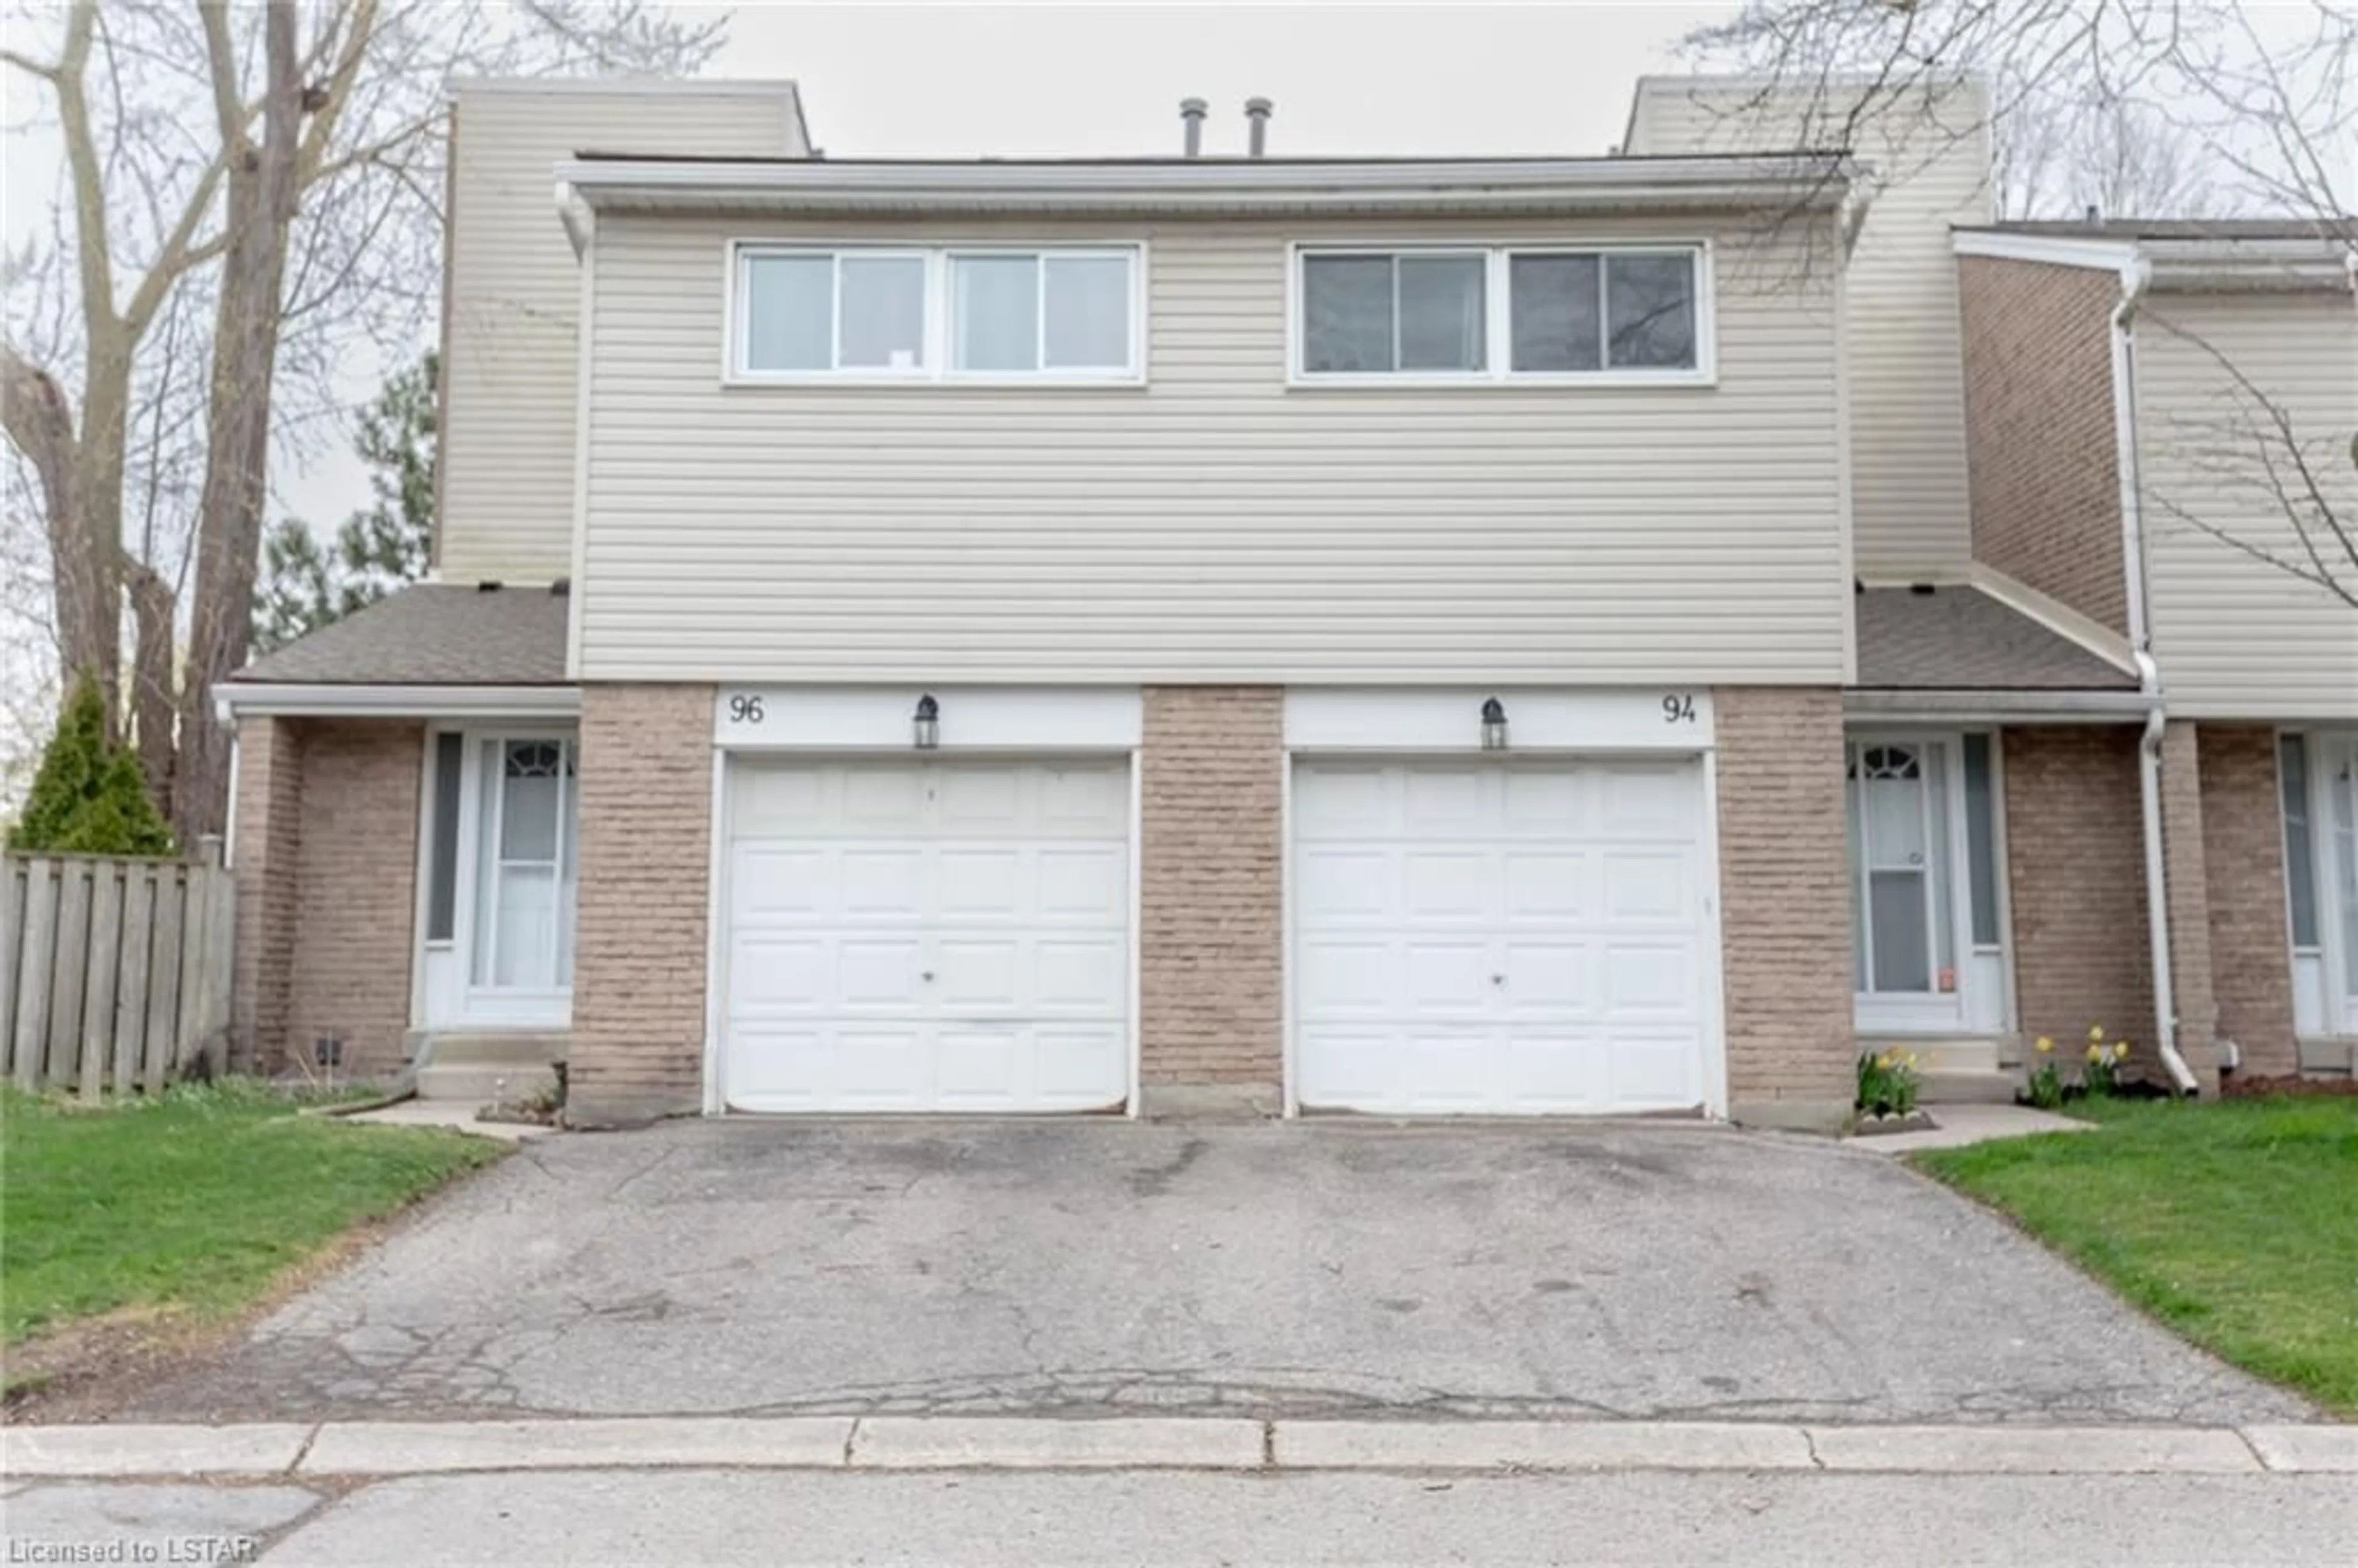 A pic from exterior of the house or condo for 590 Millbank Dr #94, London Ontario N6E 2H2